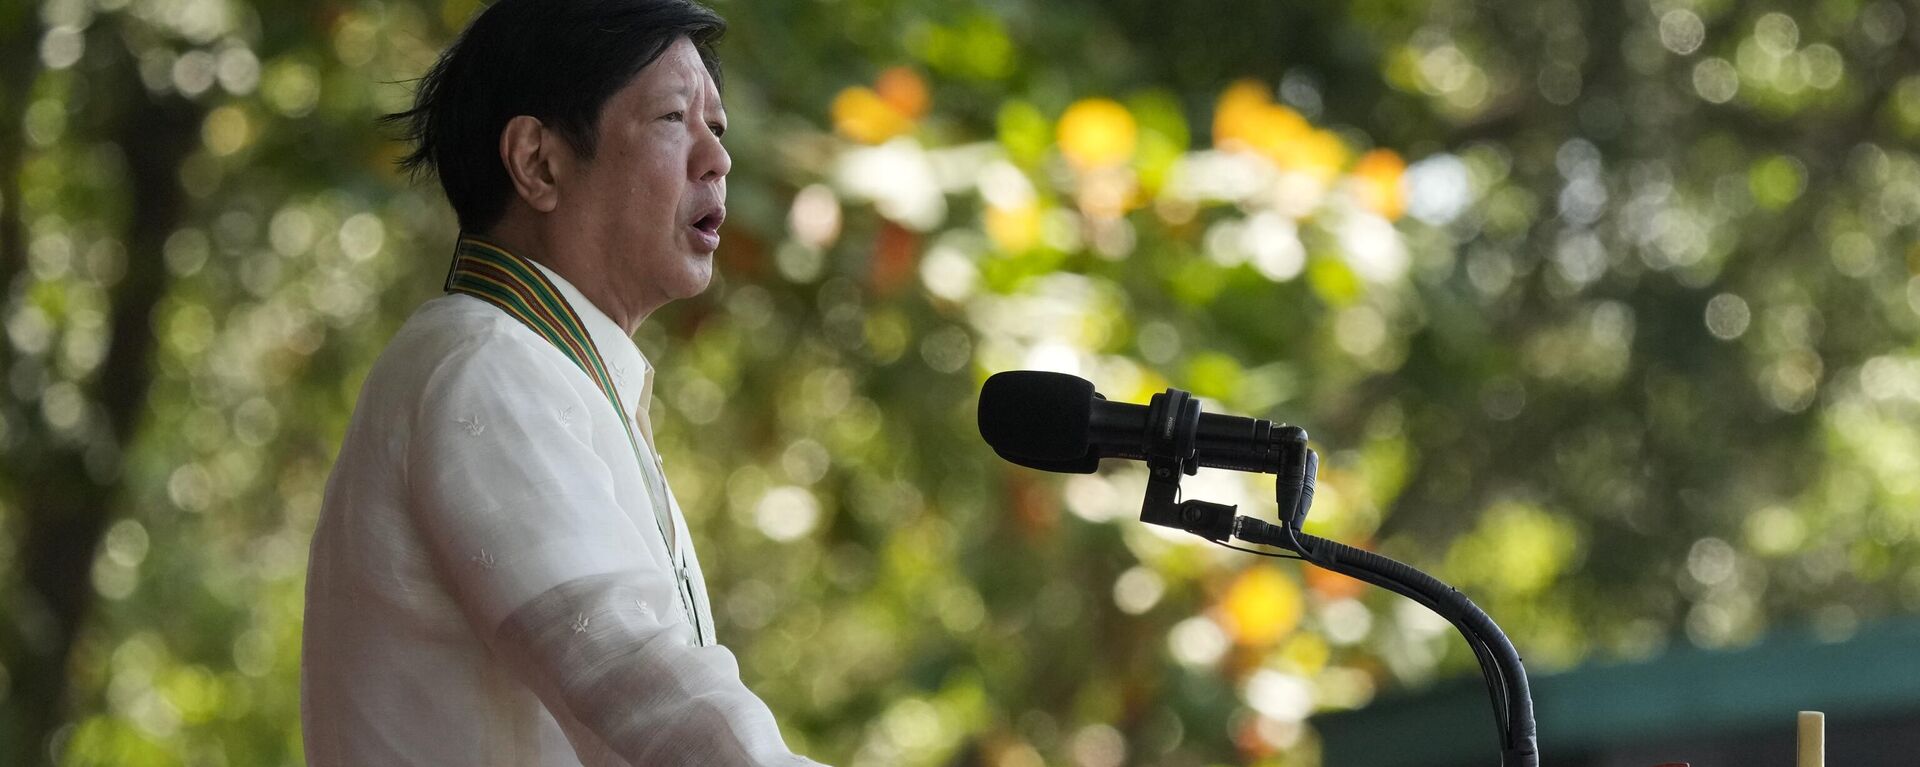 Philippine President Ferdinand Marcos Jr. delivers his speech at the 126th founding anniversary of the Philippine Army at Fort Bonifacio in Taguig, Philippines on Wednesday, March 22, 2023. - Sputnik International, 1920, 20.11.2023